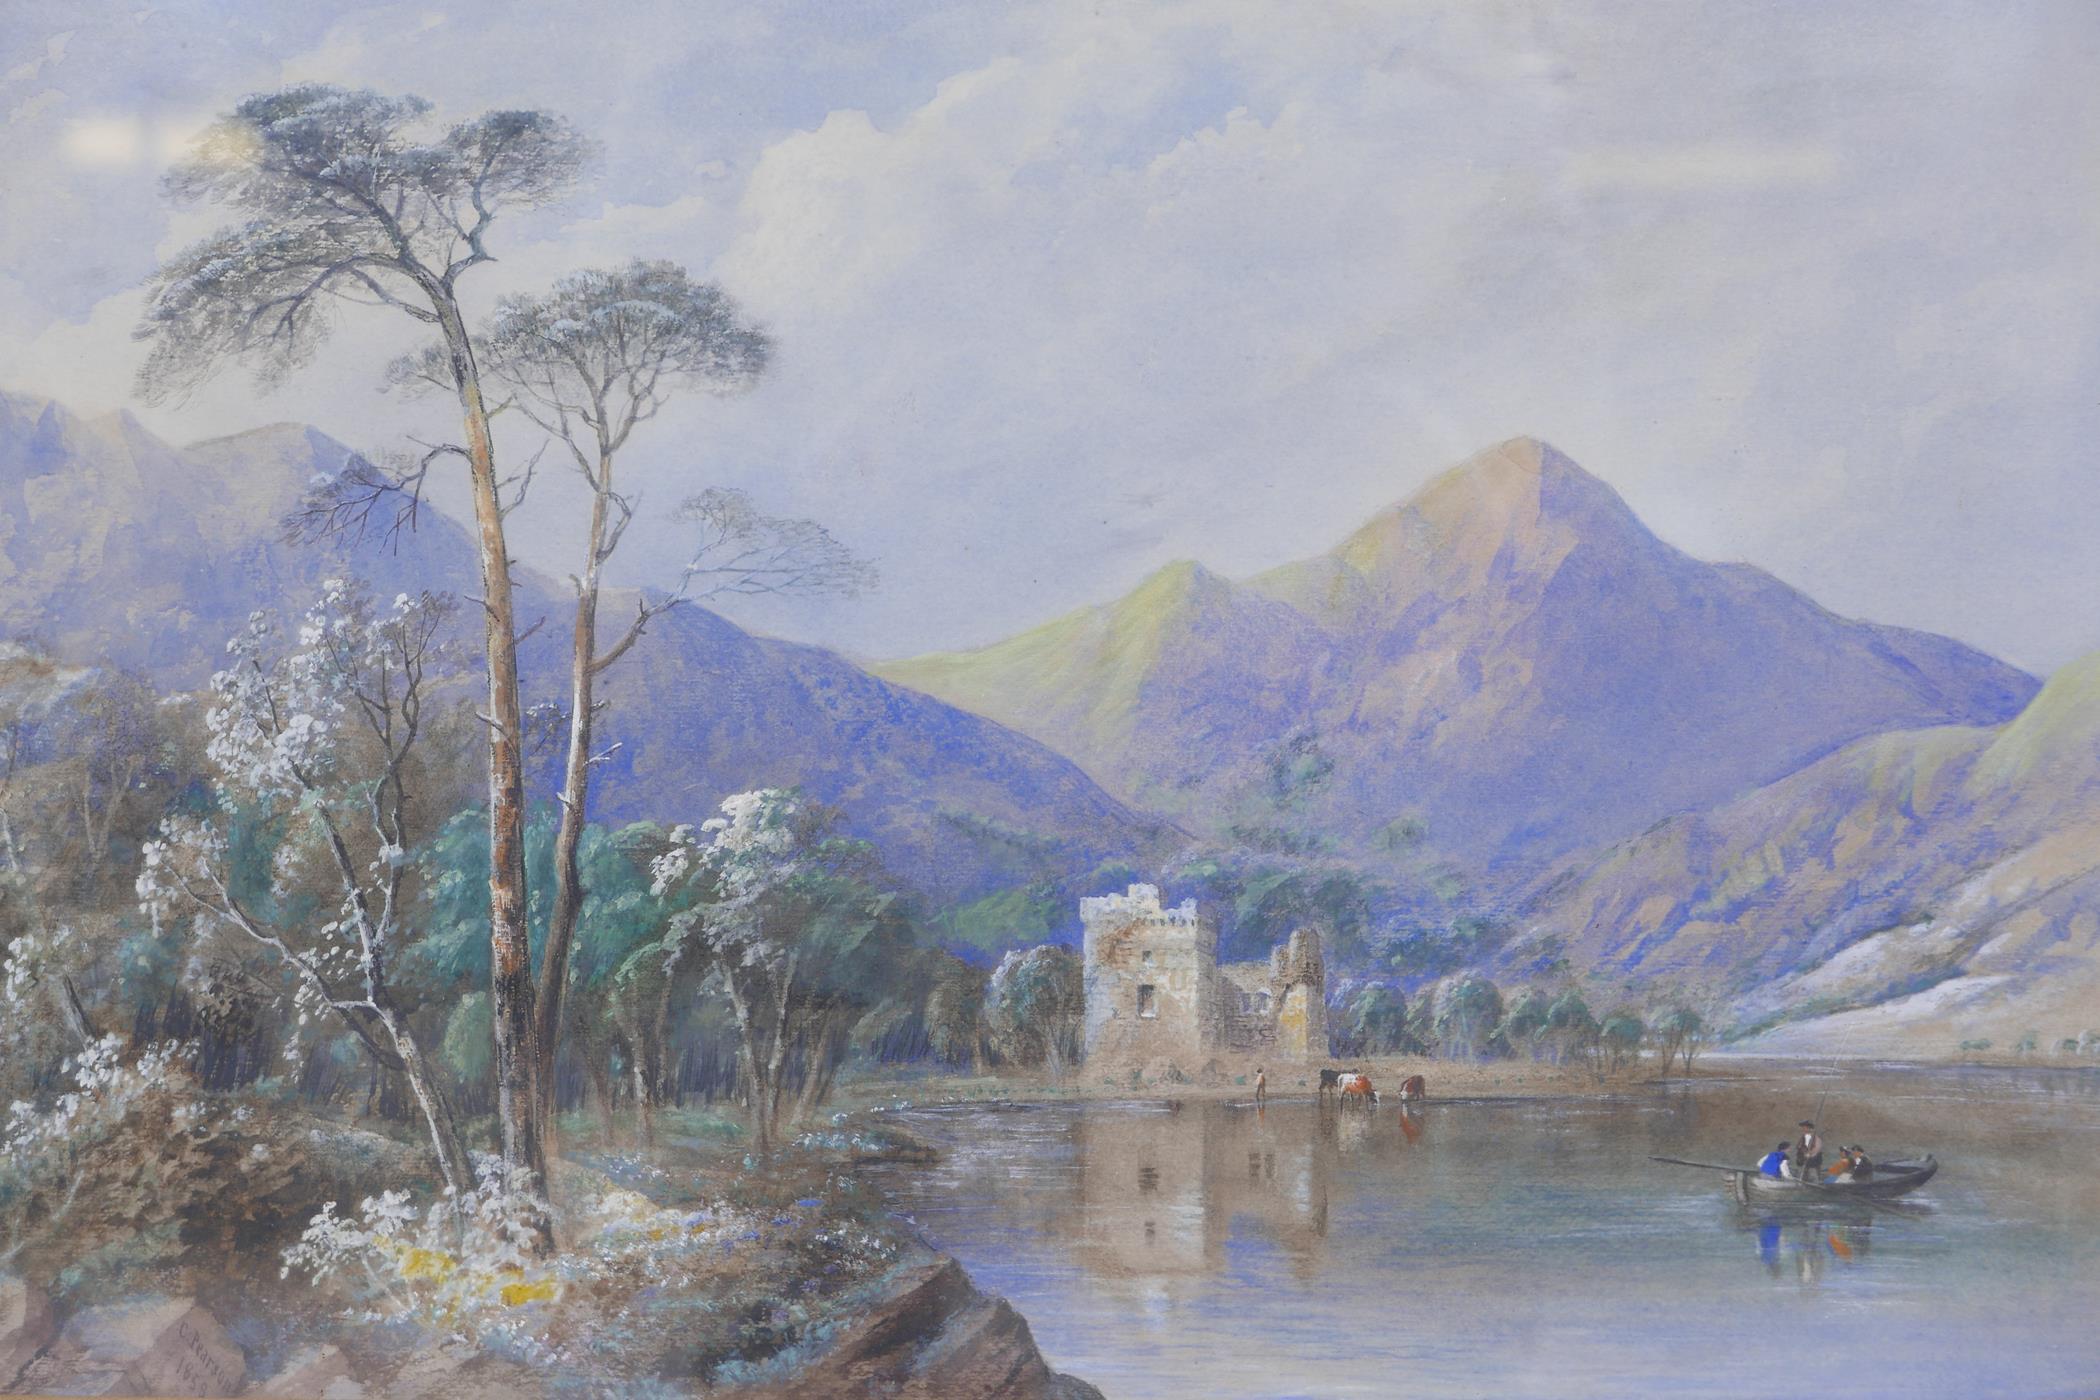 Cornelius Pearson, lake scene with highland mountains, watercolour heightened with white, signed and